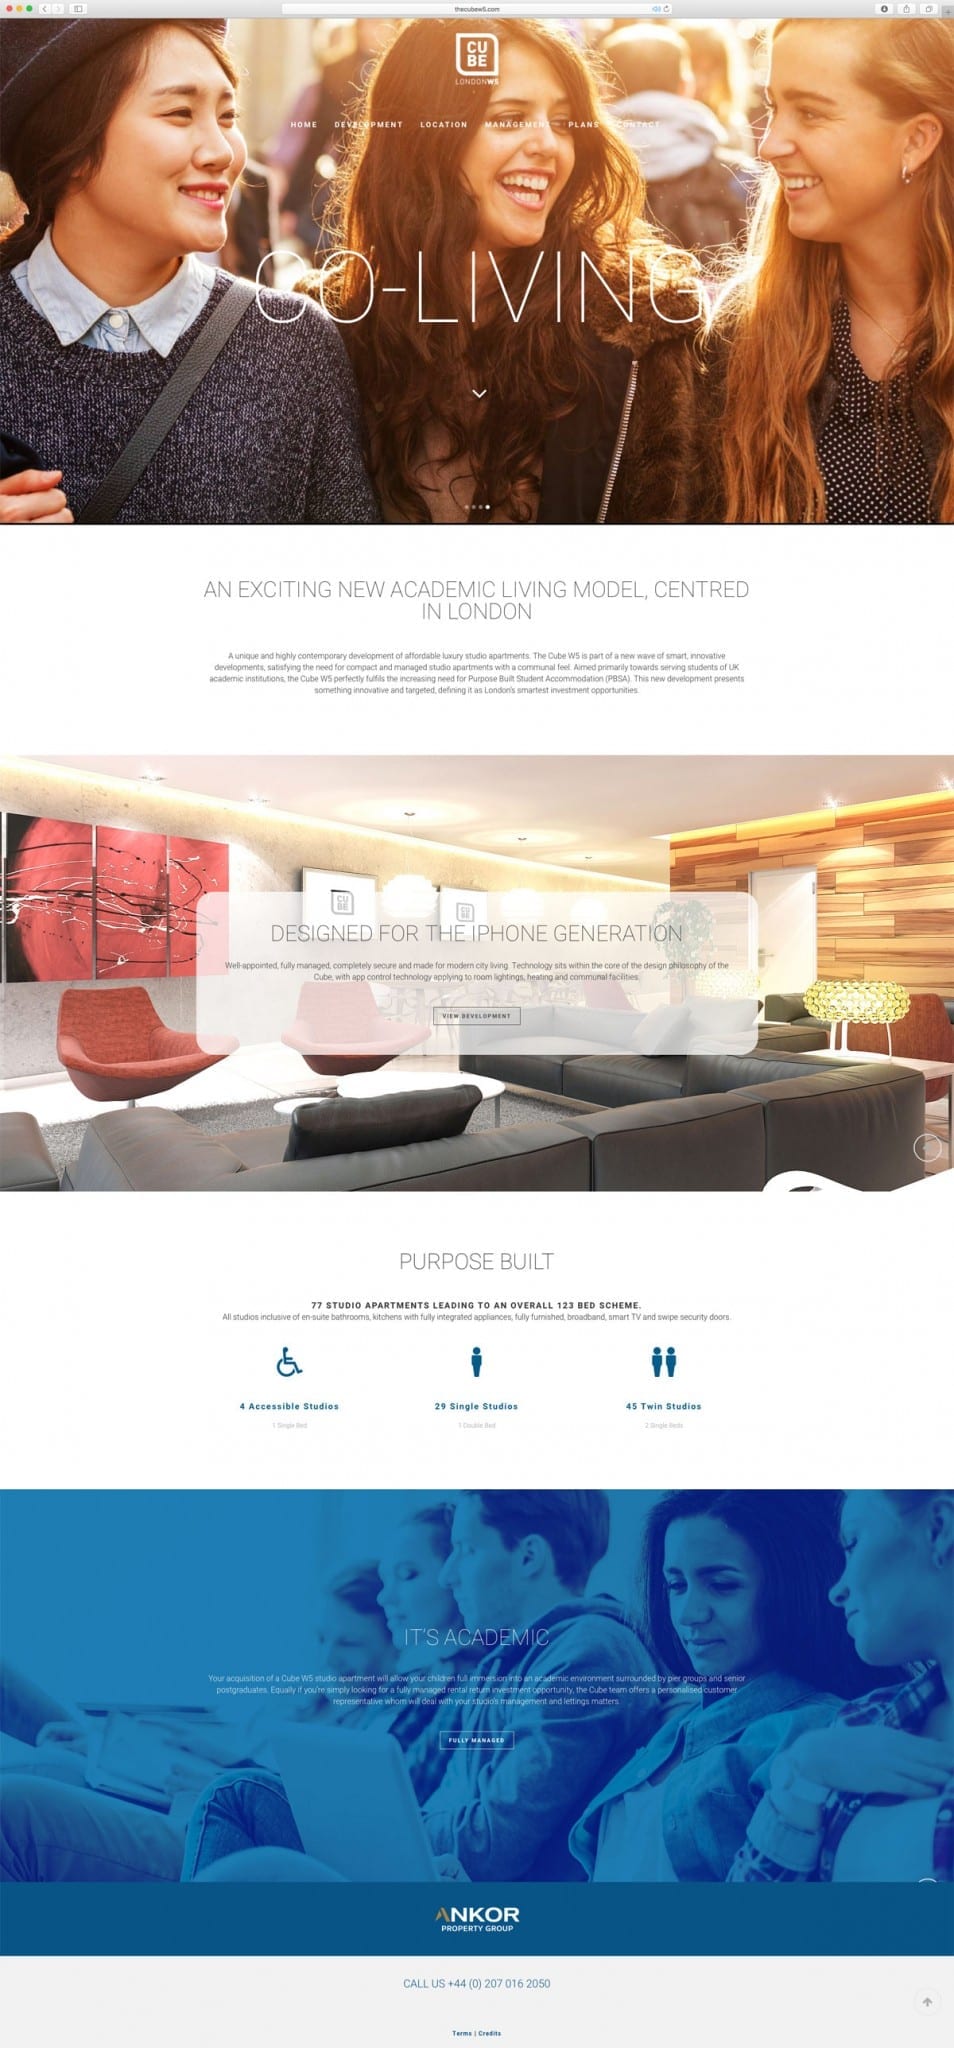 mike-garland-the-cube-w5-homepage-property-developer-marketing-website-design-co-living